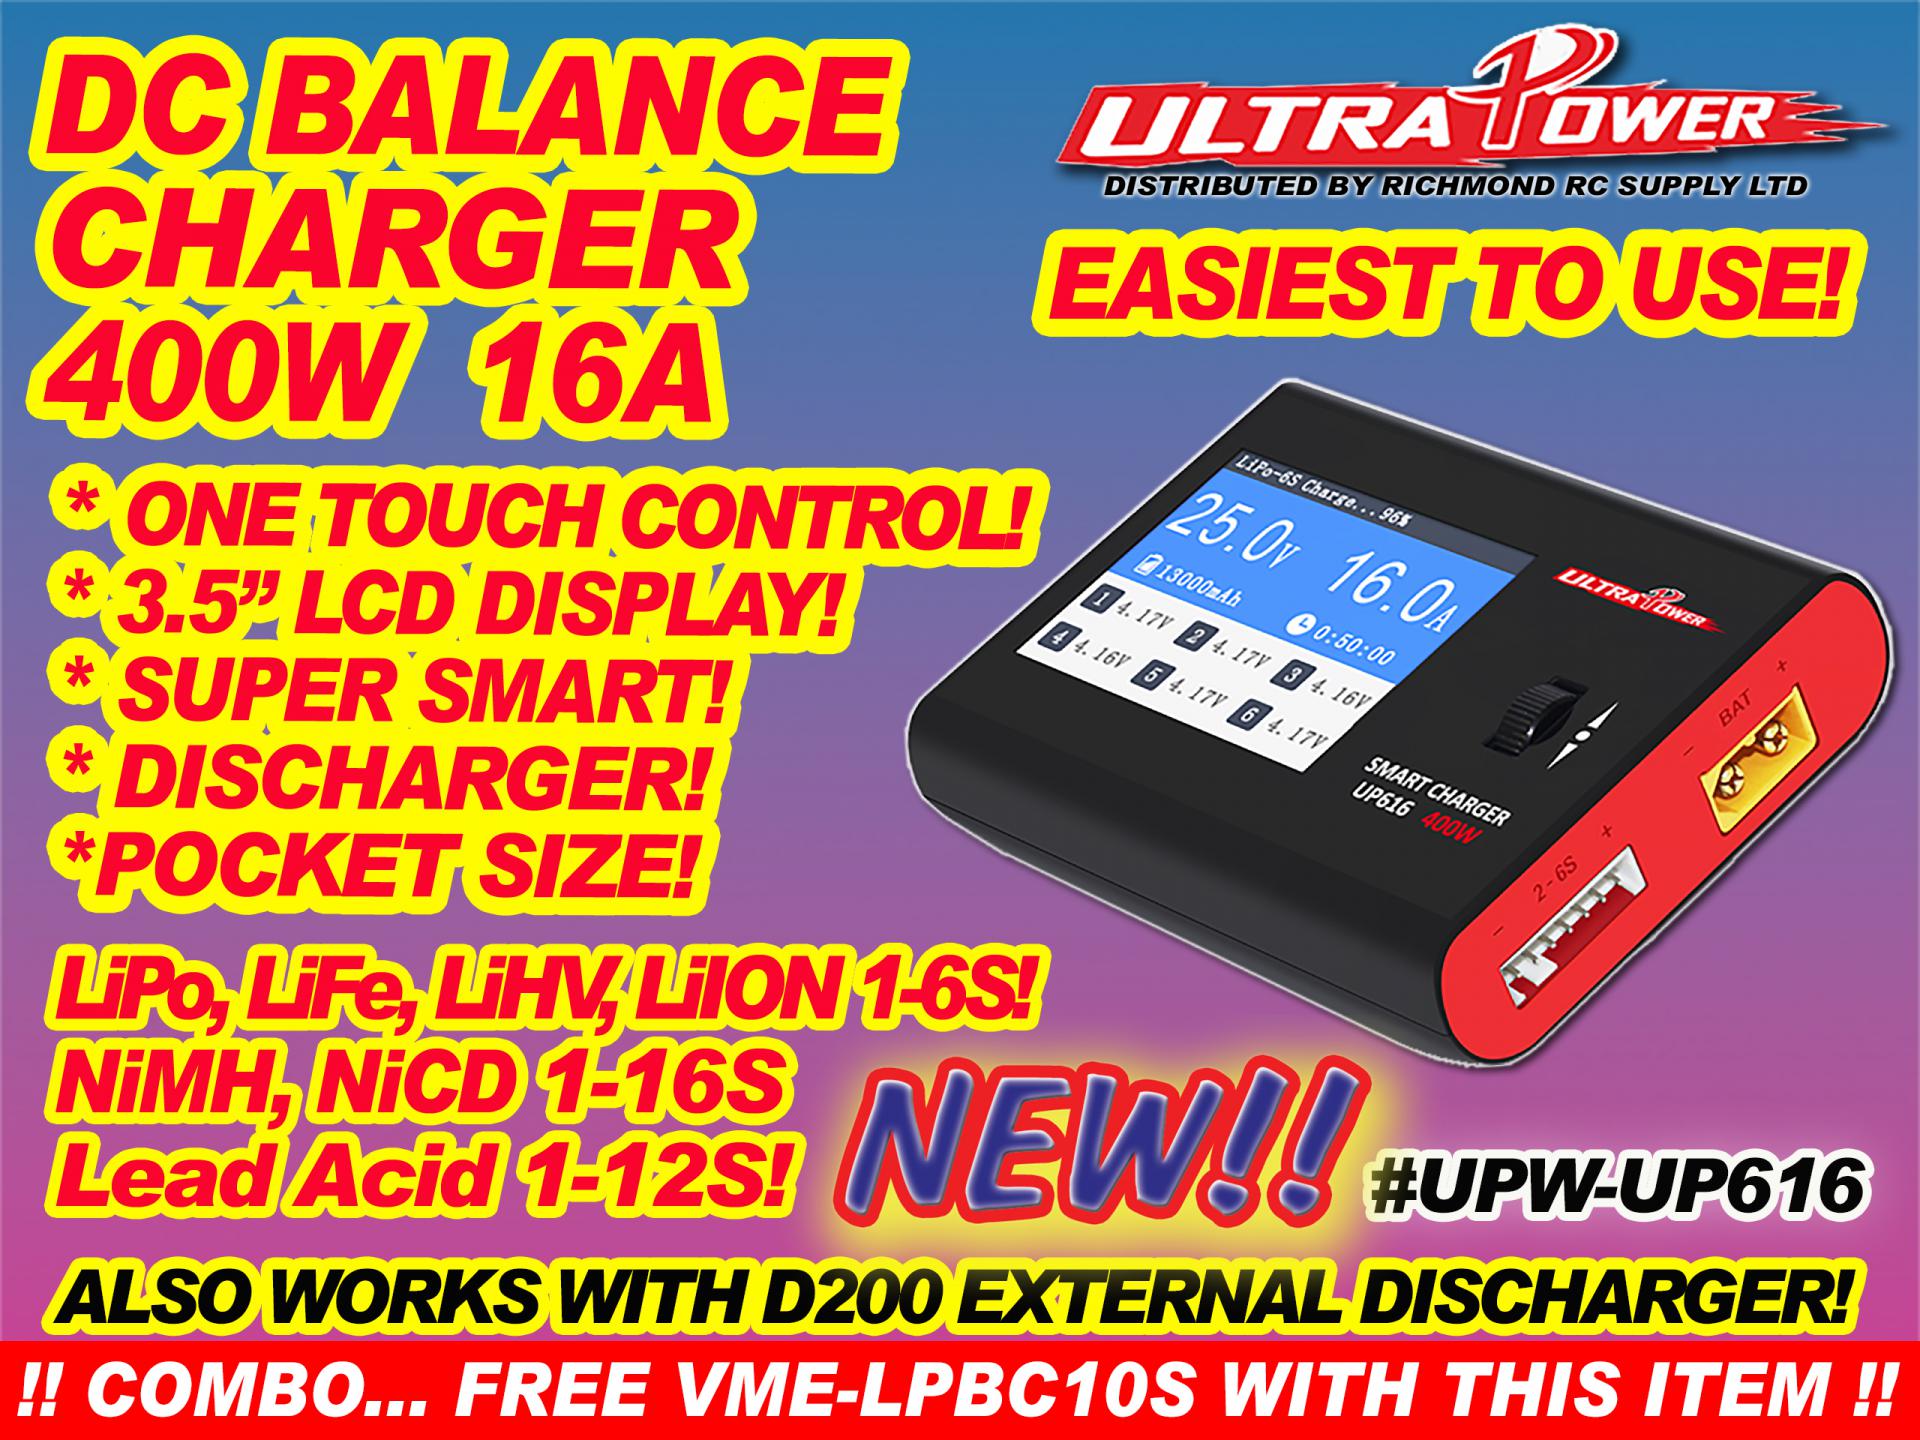 ULTRA POWER CHARGER - DC, 400W 16A w/TFT SCREEN x1  [ 13113]